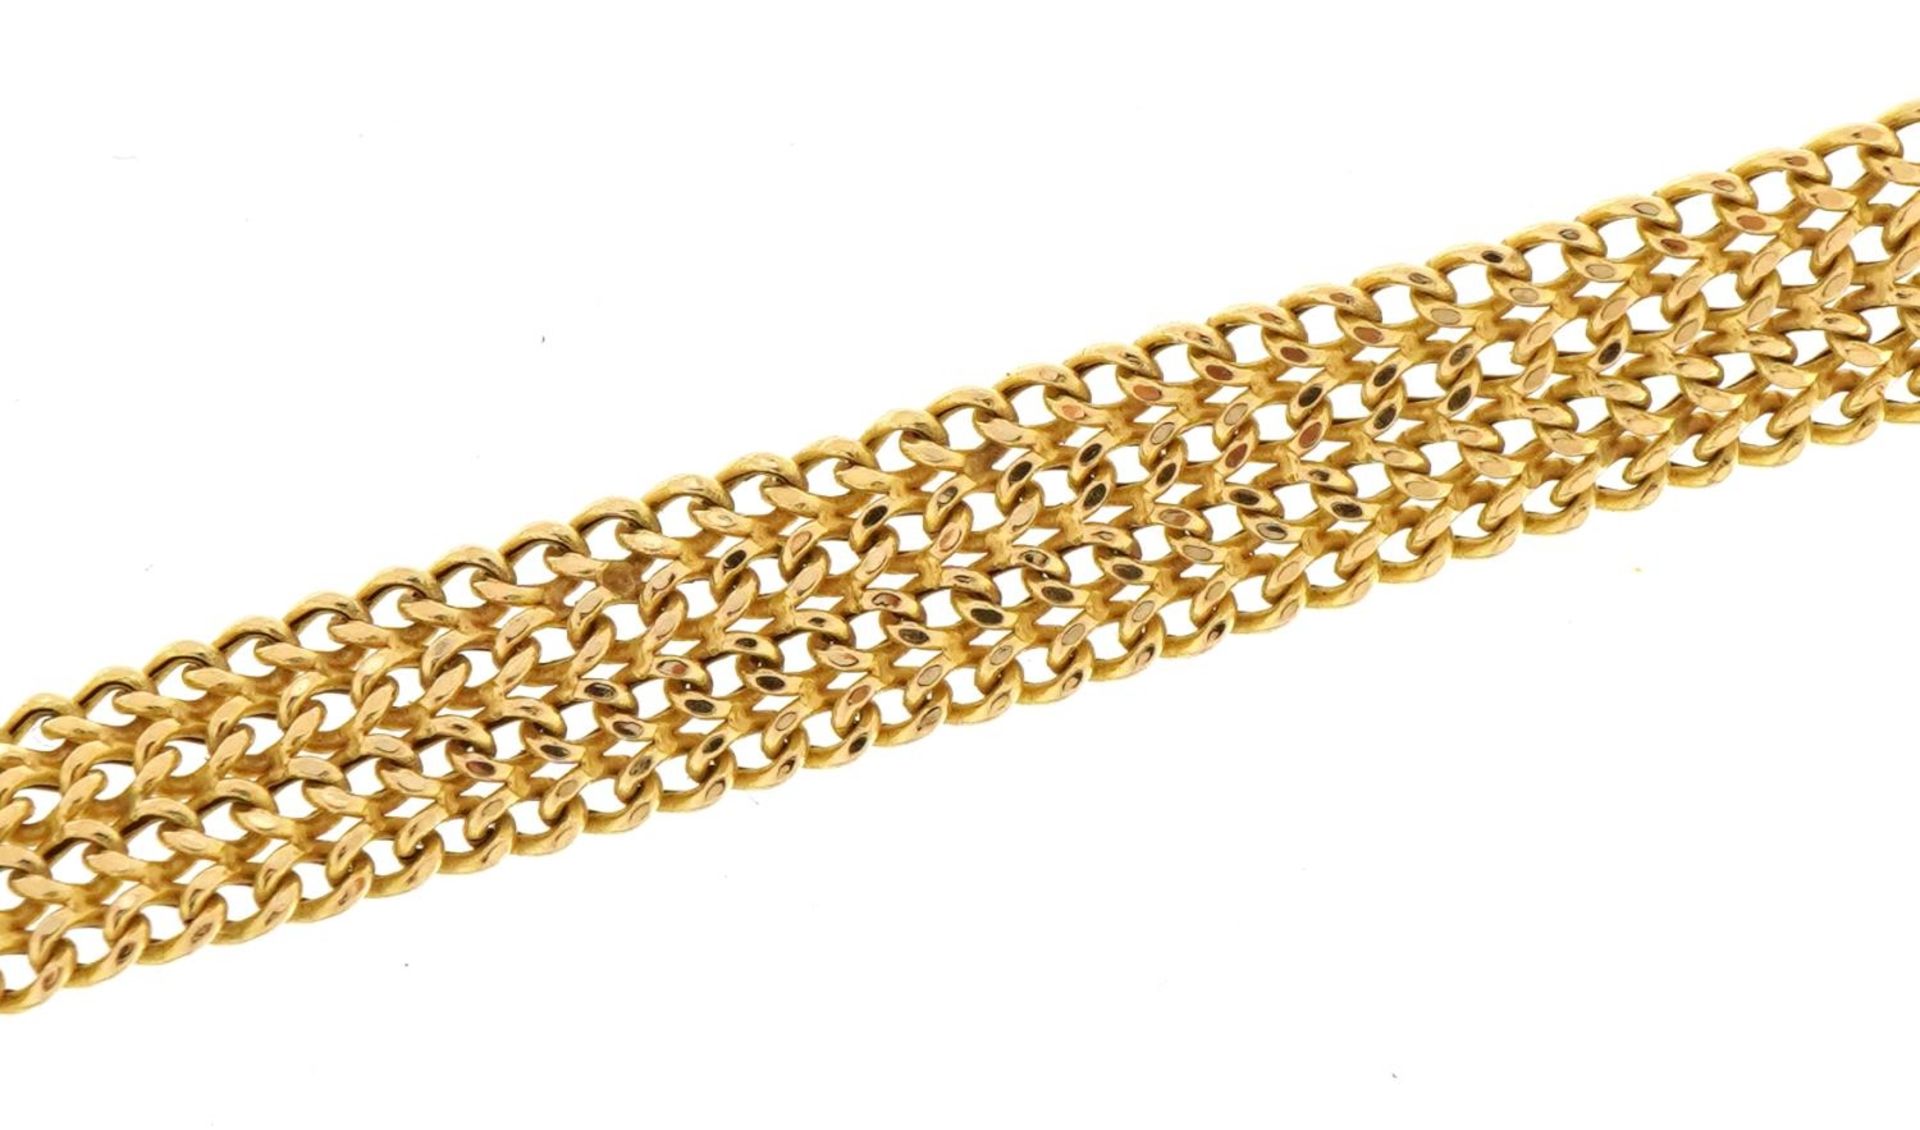 9ct gold curb link four row bracelet, 19cm in length, 3.2g : For further information on this lot